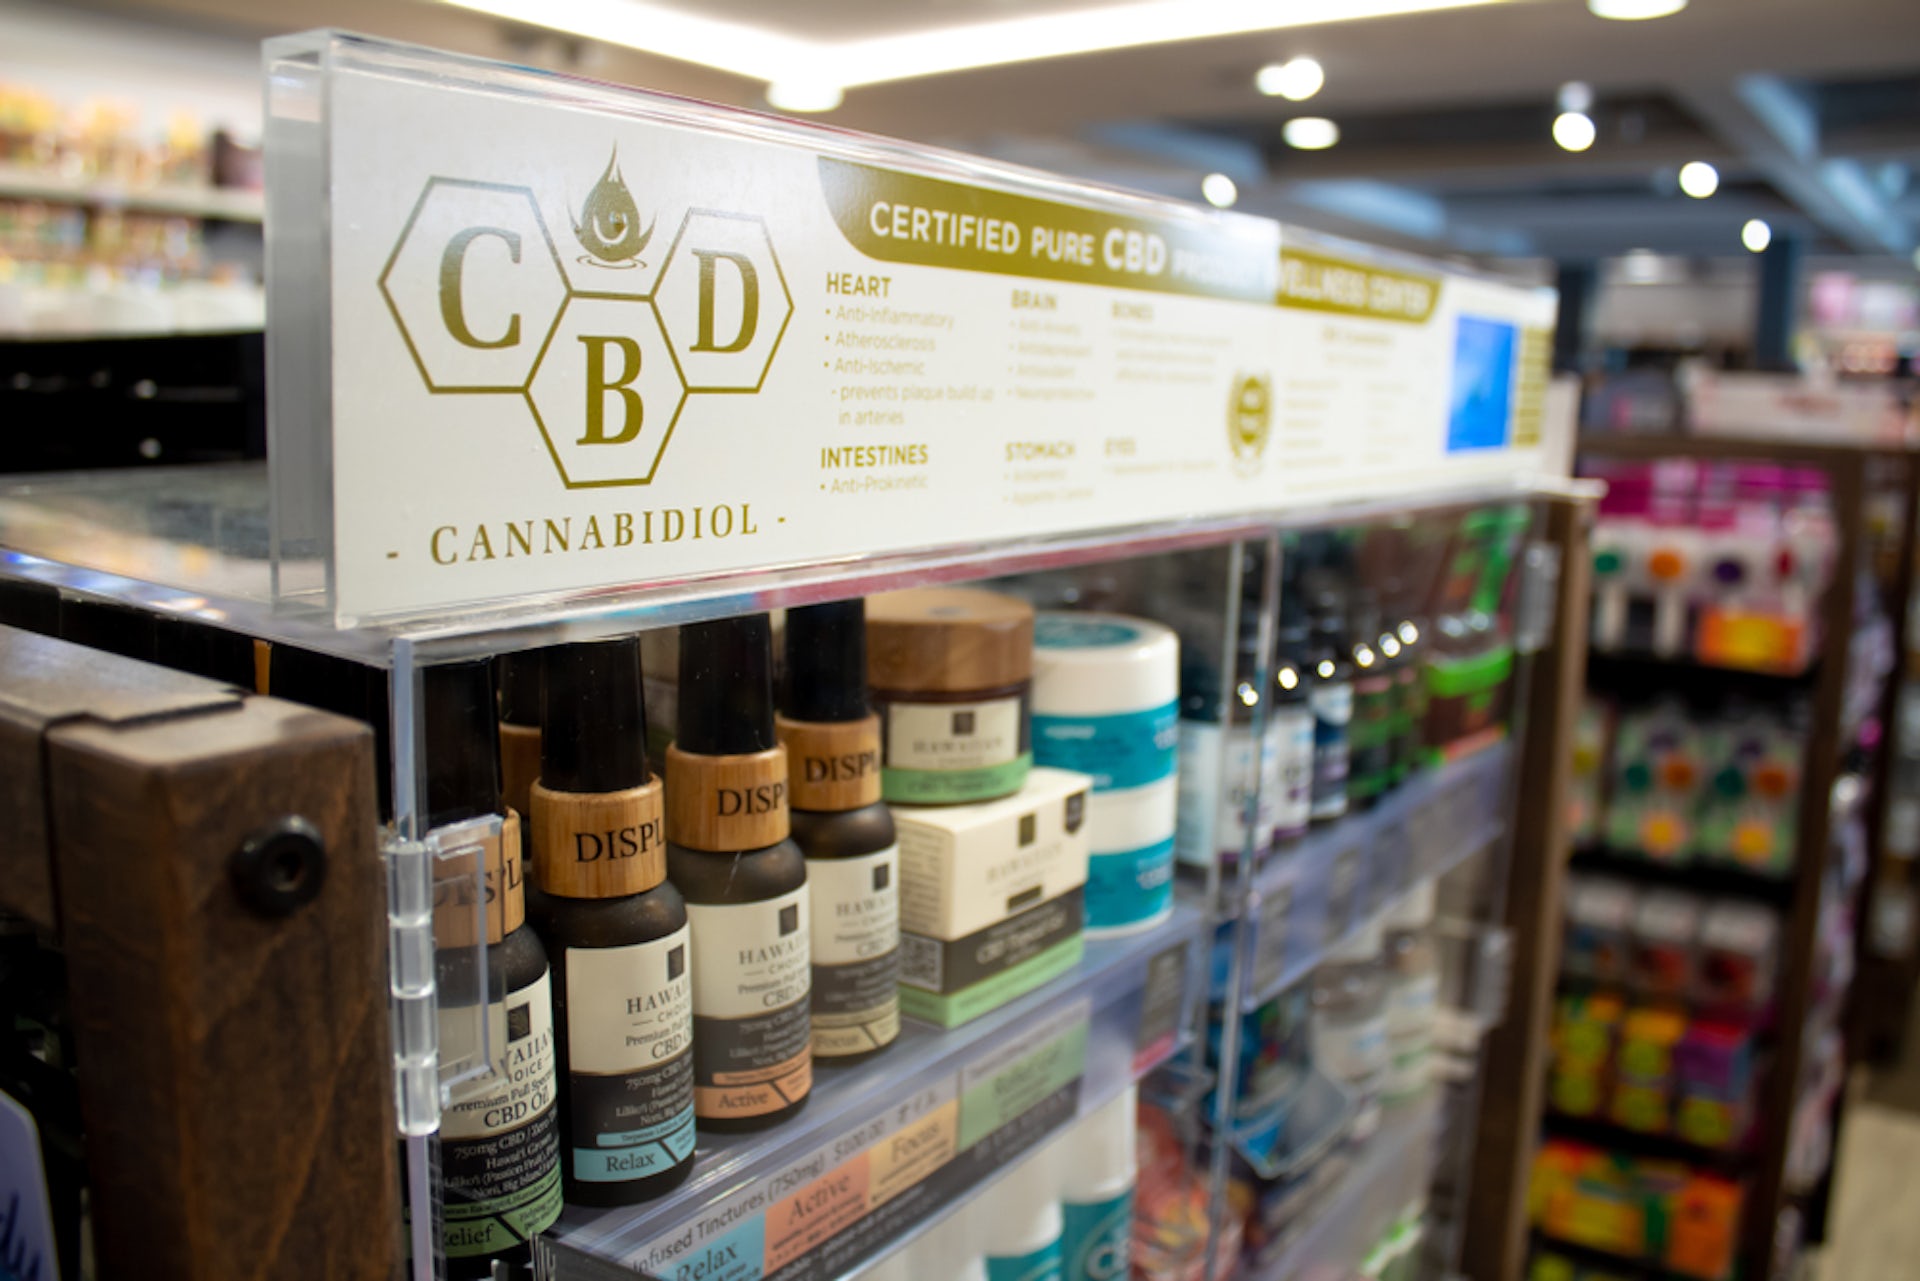 A shelf stocked with CBD products